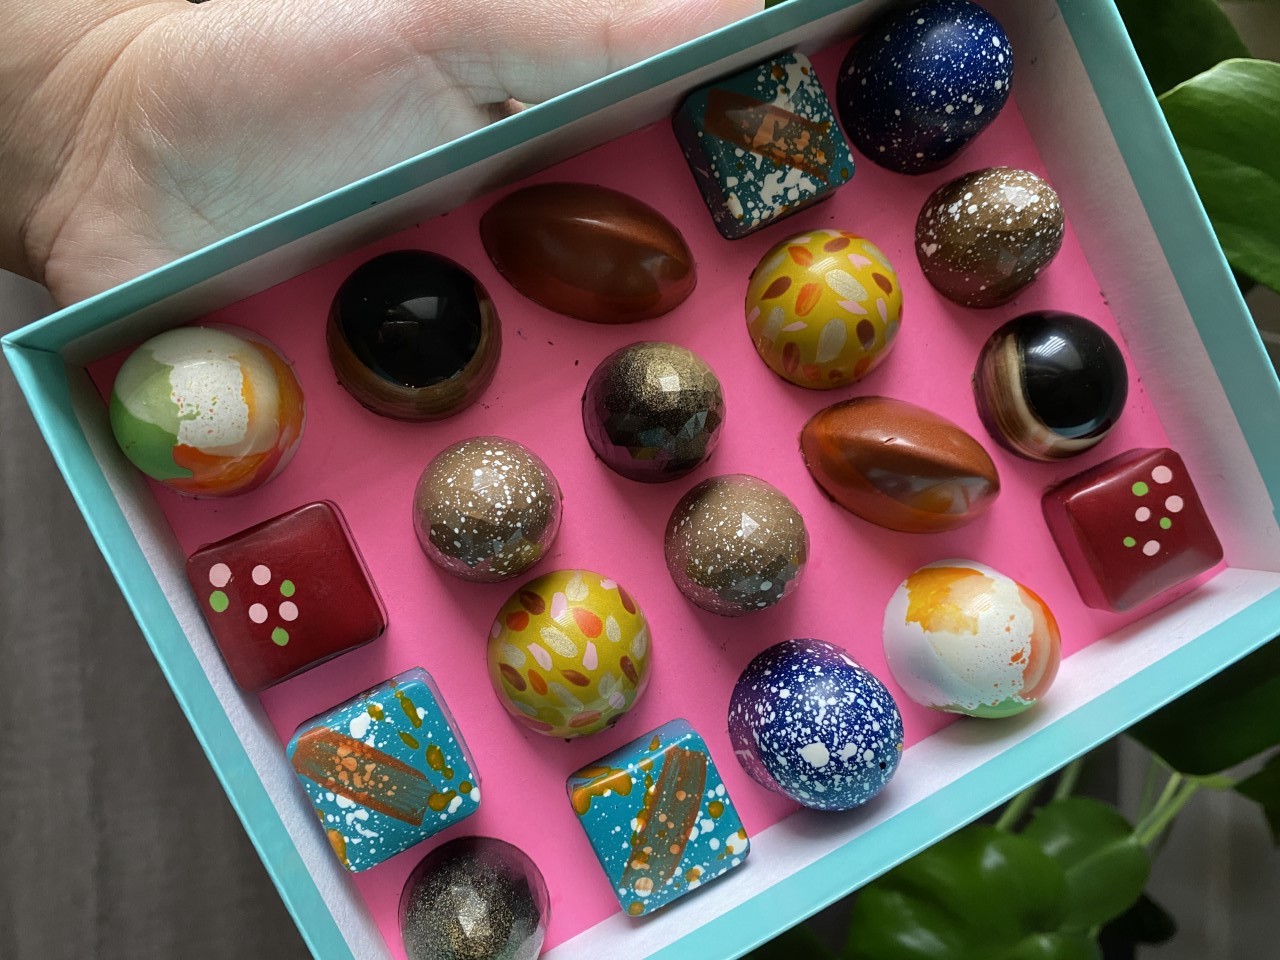 A box of colorful chocolate bonbons by Maravilla Cacao.